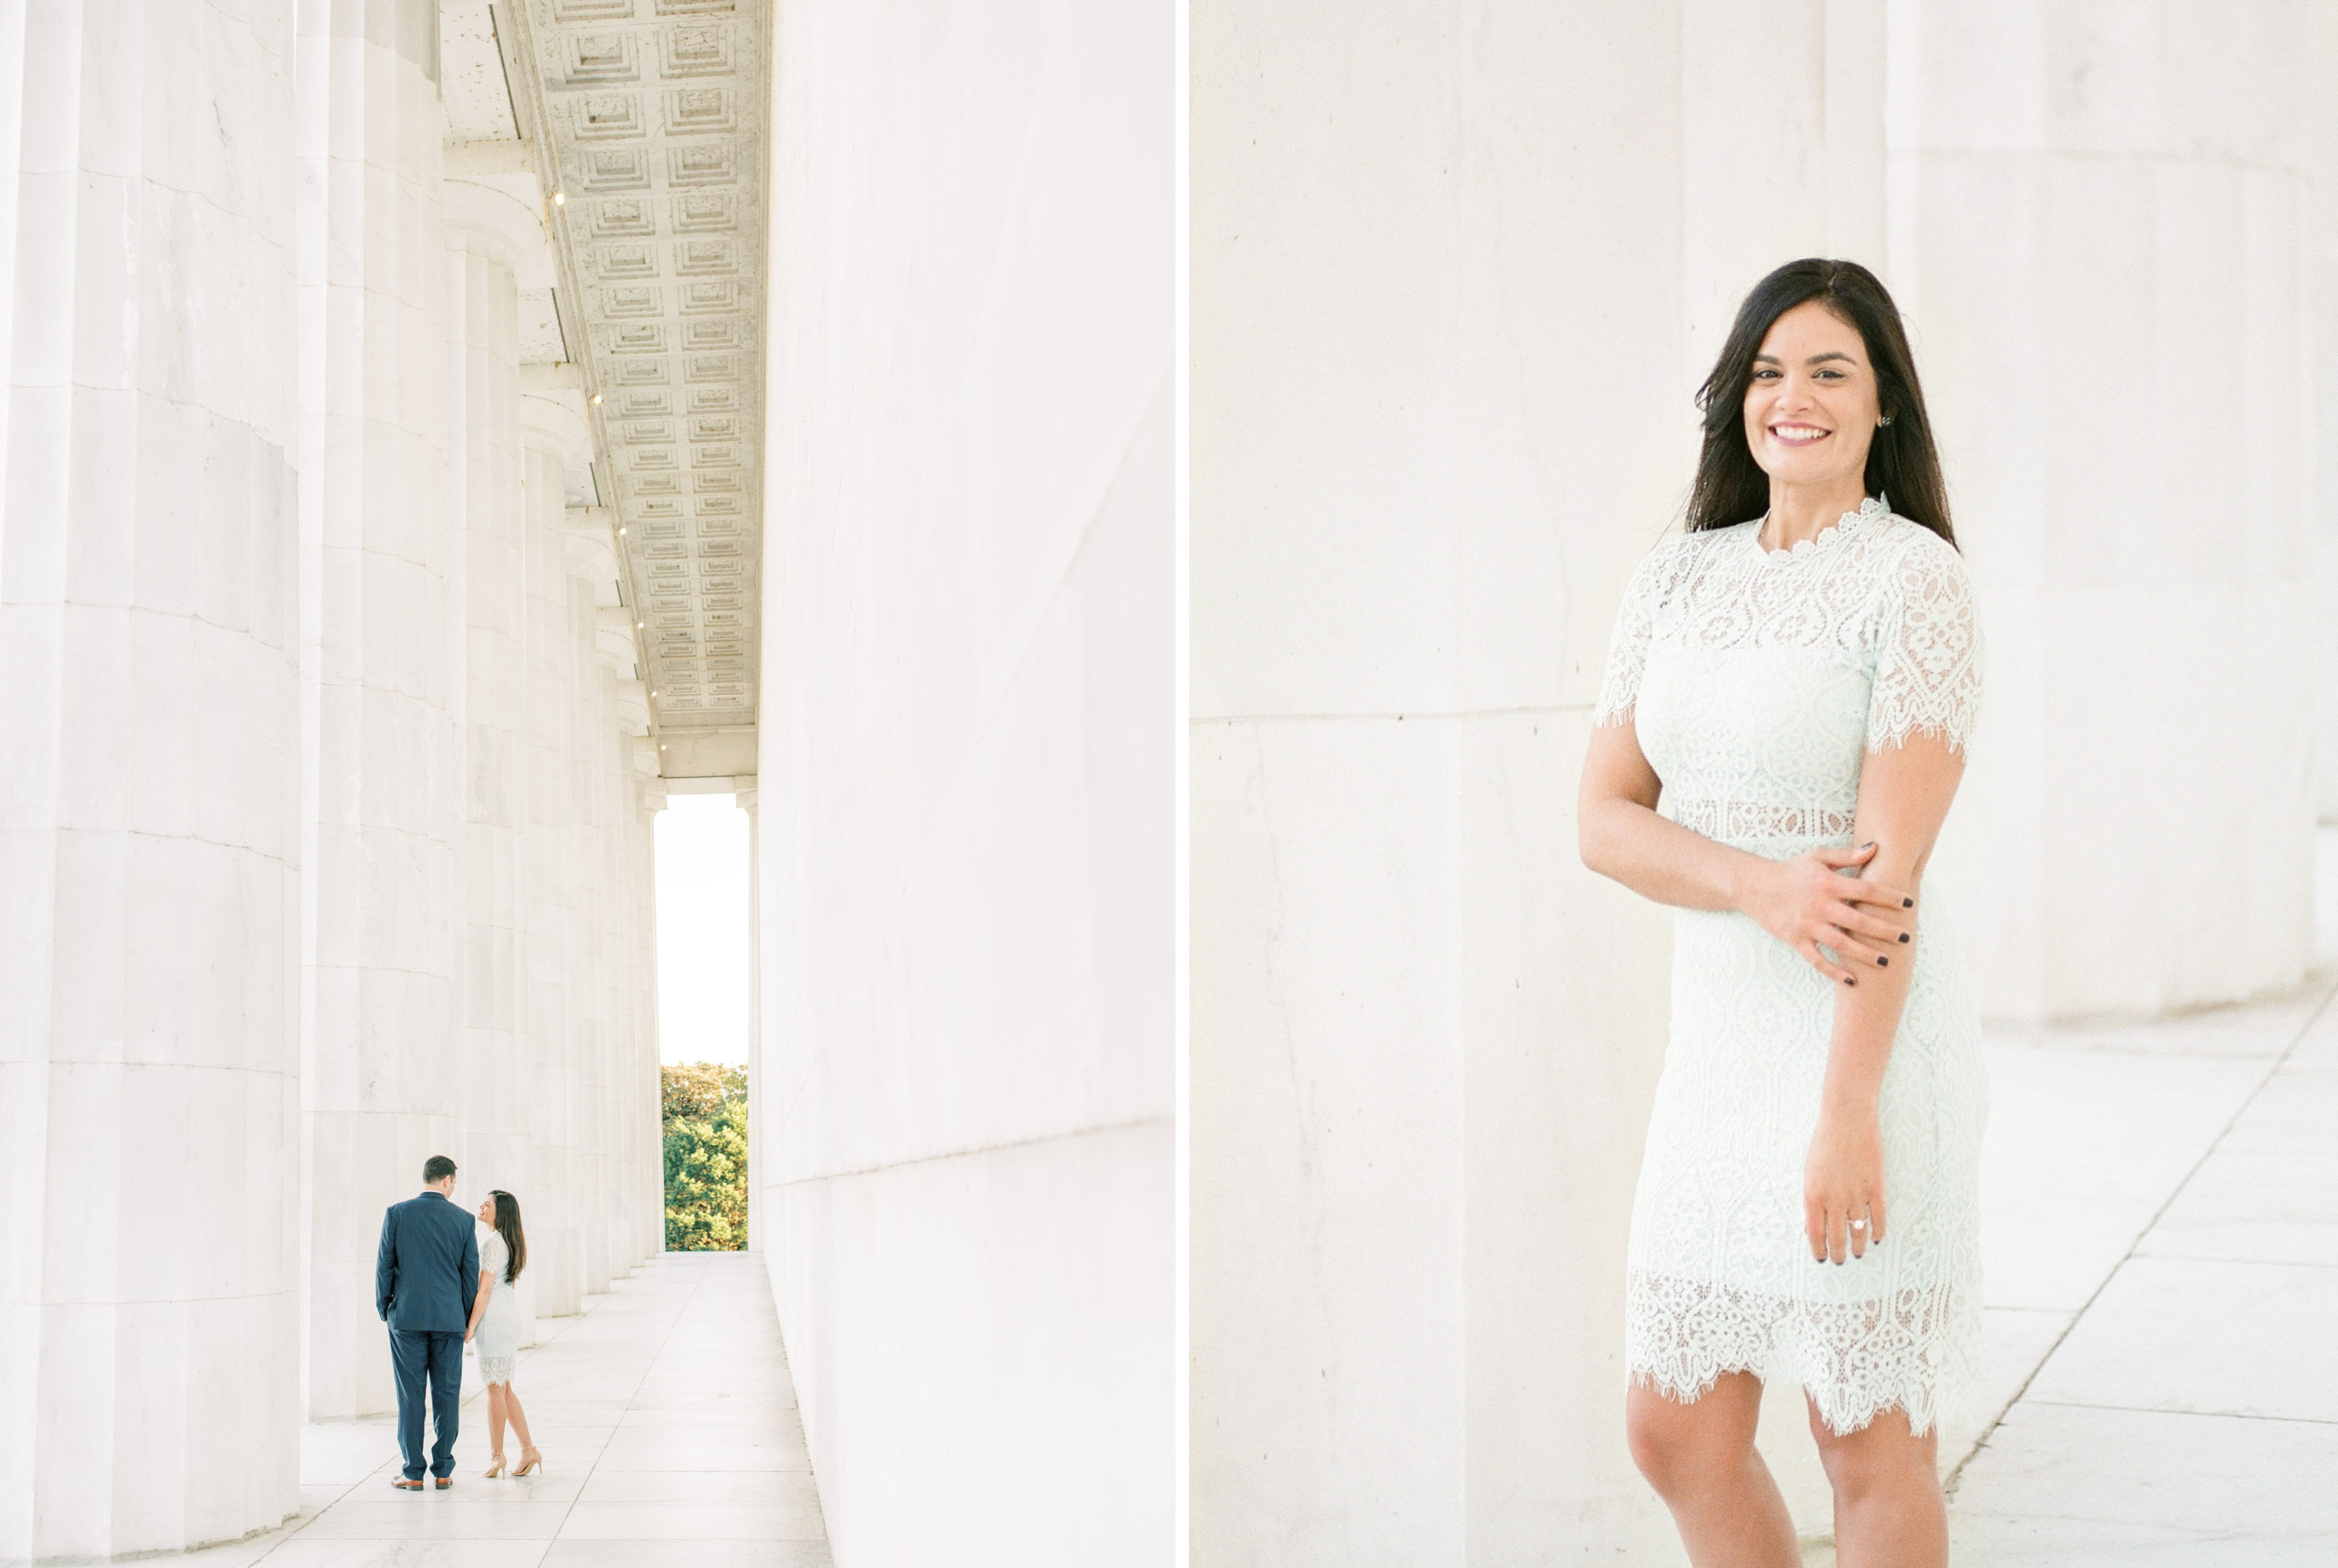 A sunrise engagement session captured on film at the Lincoln Memorial and DC War Memorial in downtown Washington, DC.